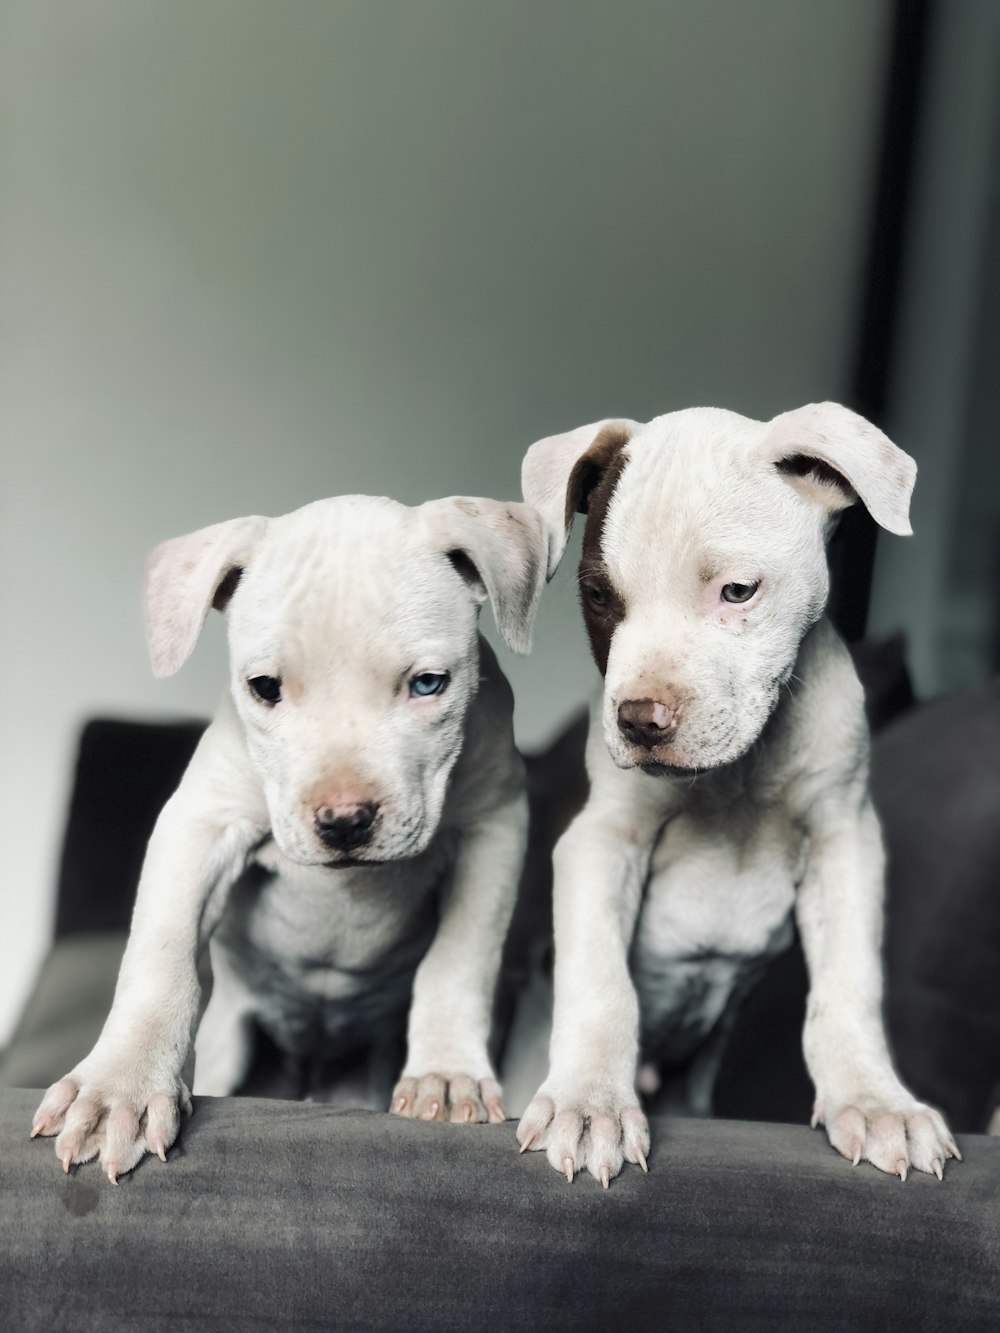 two white puppies sitting on a black surface